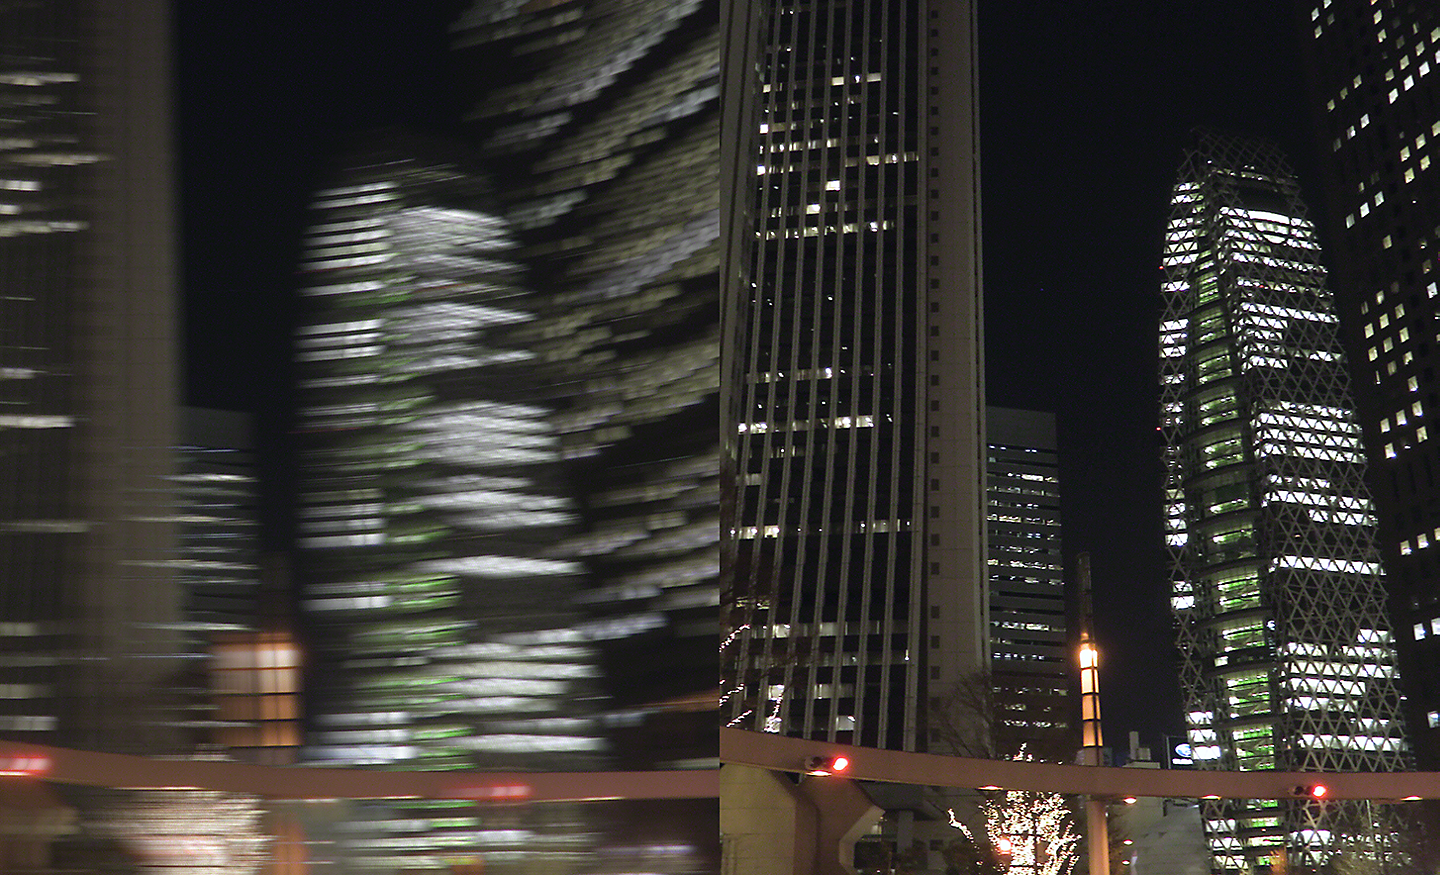 Two images of cityscape at night, one blurred, the other in sharp focus.